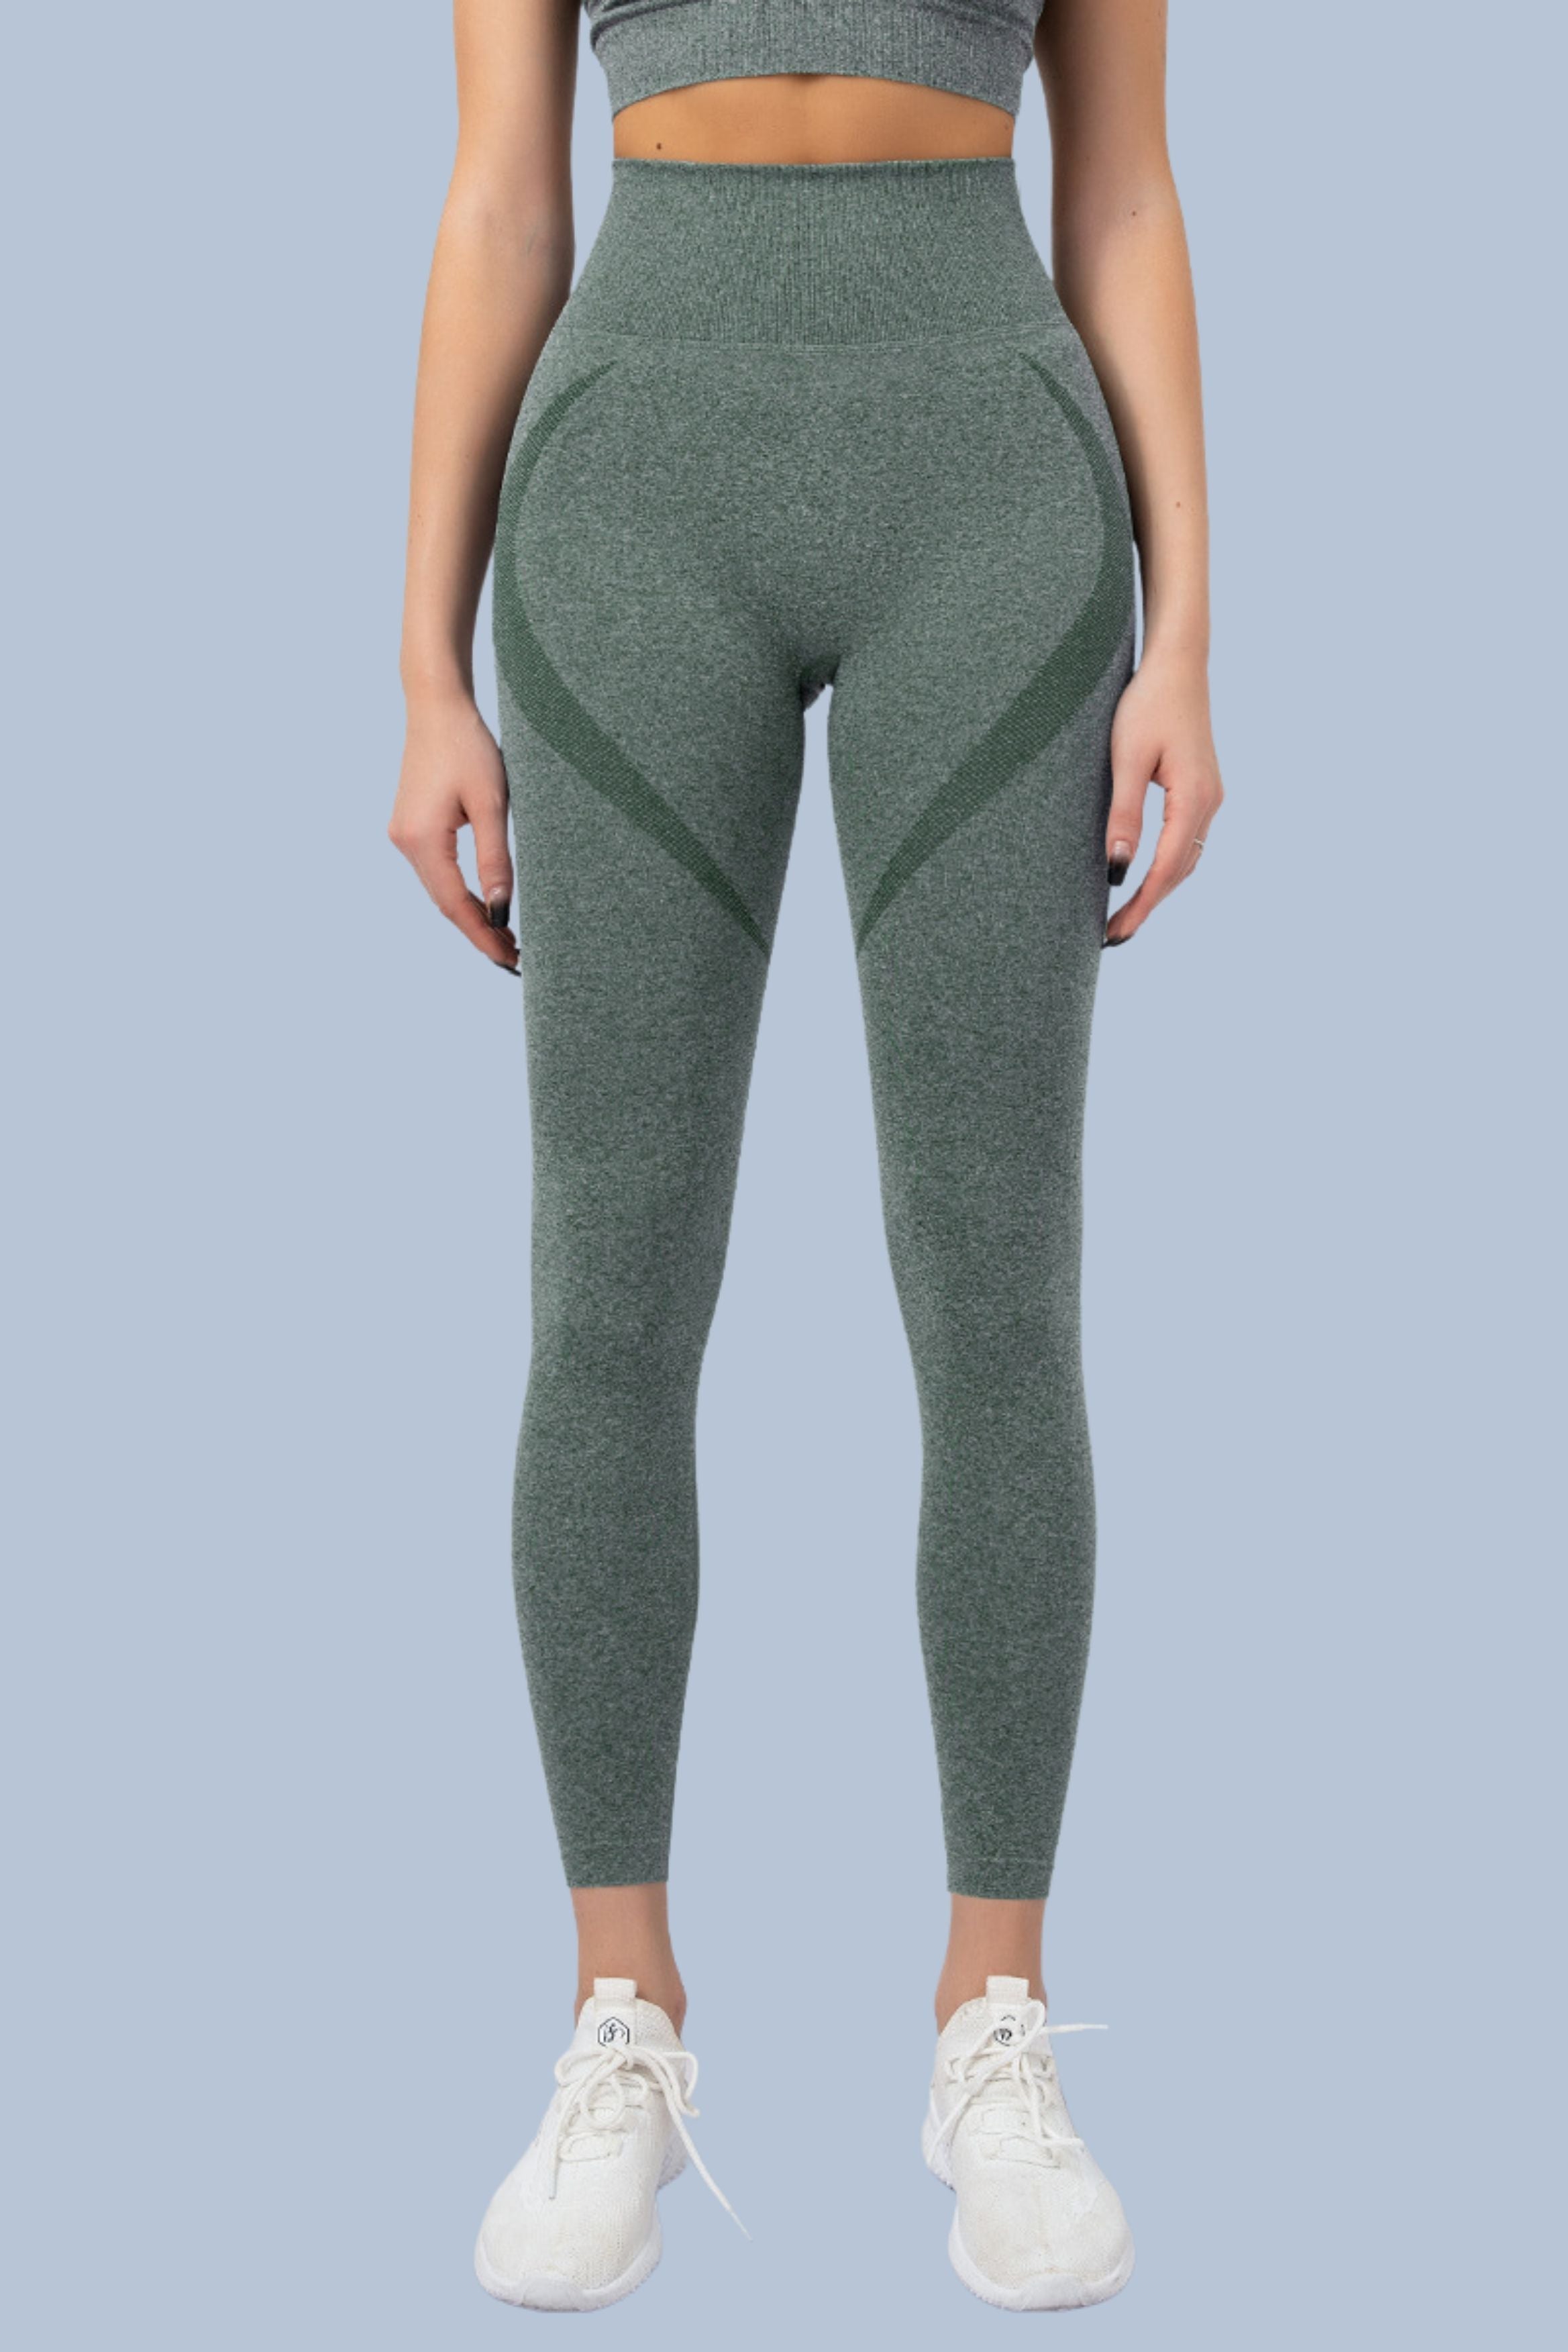 High Waisted Yoga Set For Women And Girls 2021 High Shine Gym Leggings With  Seamless Fit Perfect For Workouts And Sports X0629 From Musuo03, $18.46